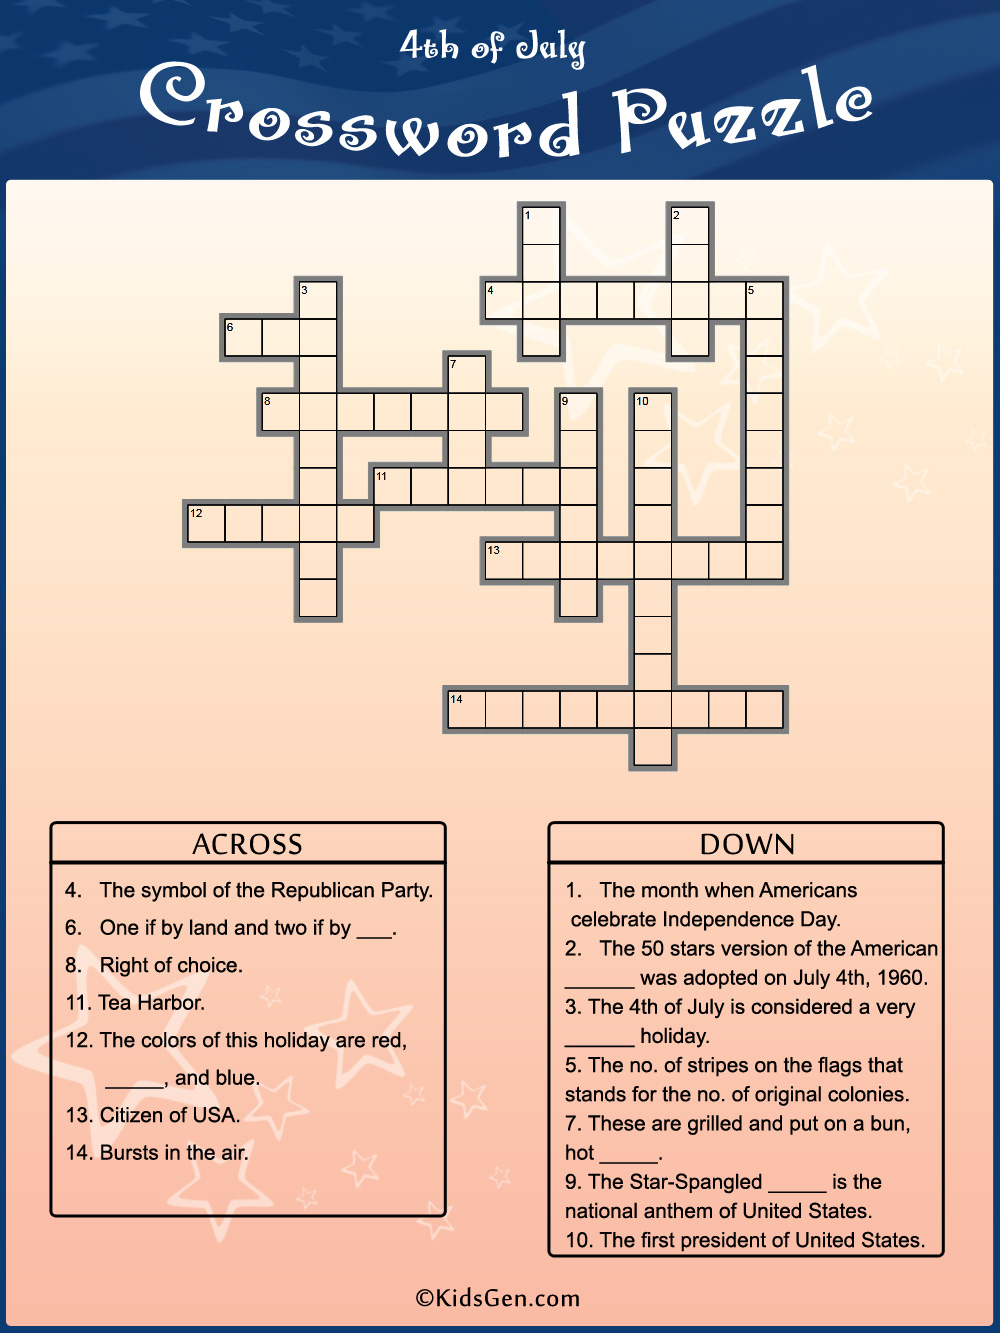 4th of July Colored Crossword template